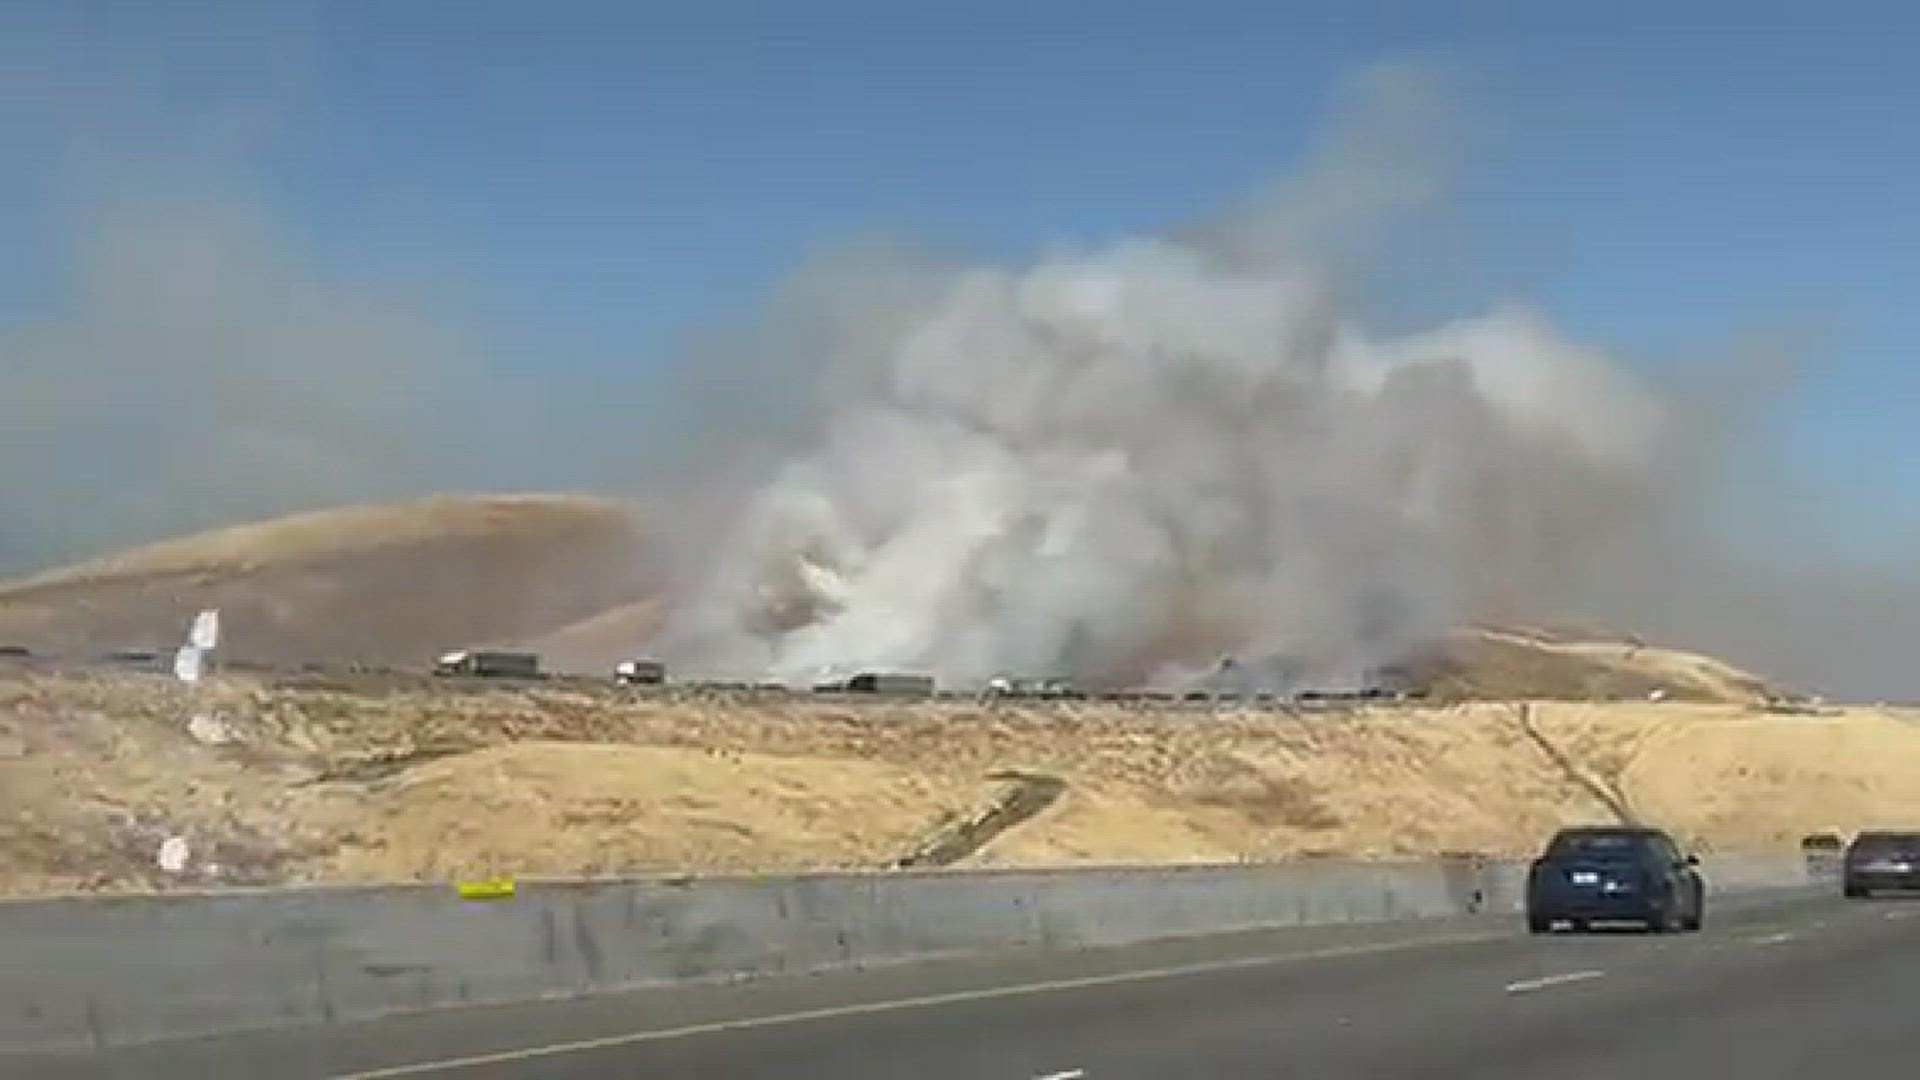 Fire westbound on Altamont Pass (May 15)
Credit: Risa Omega